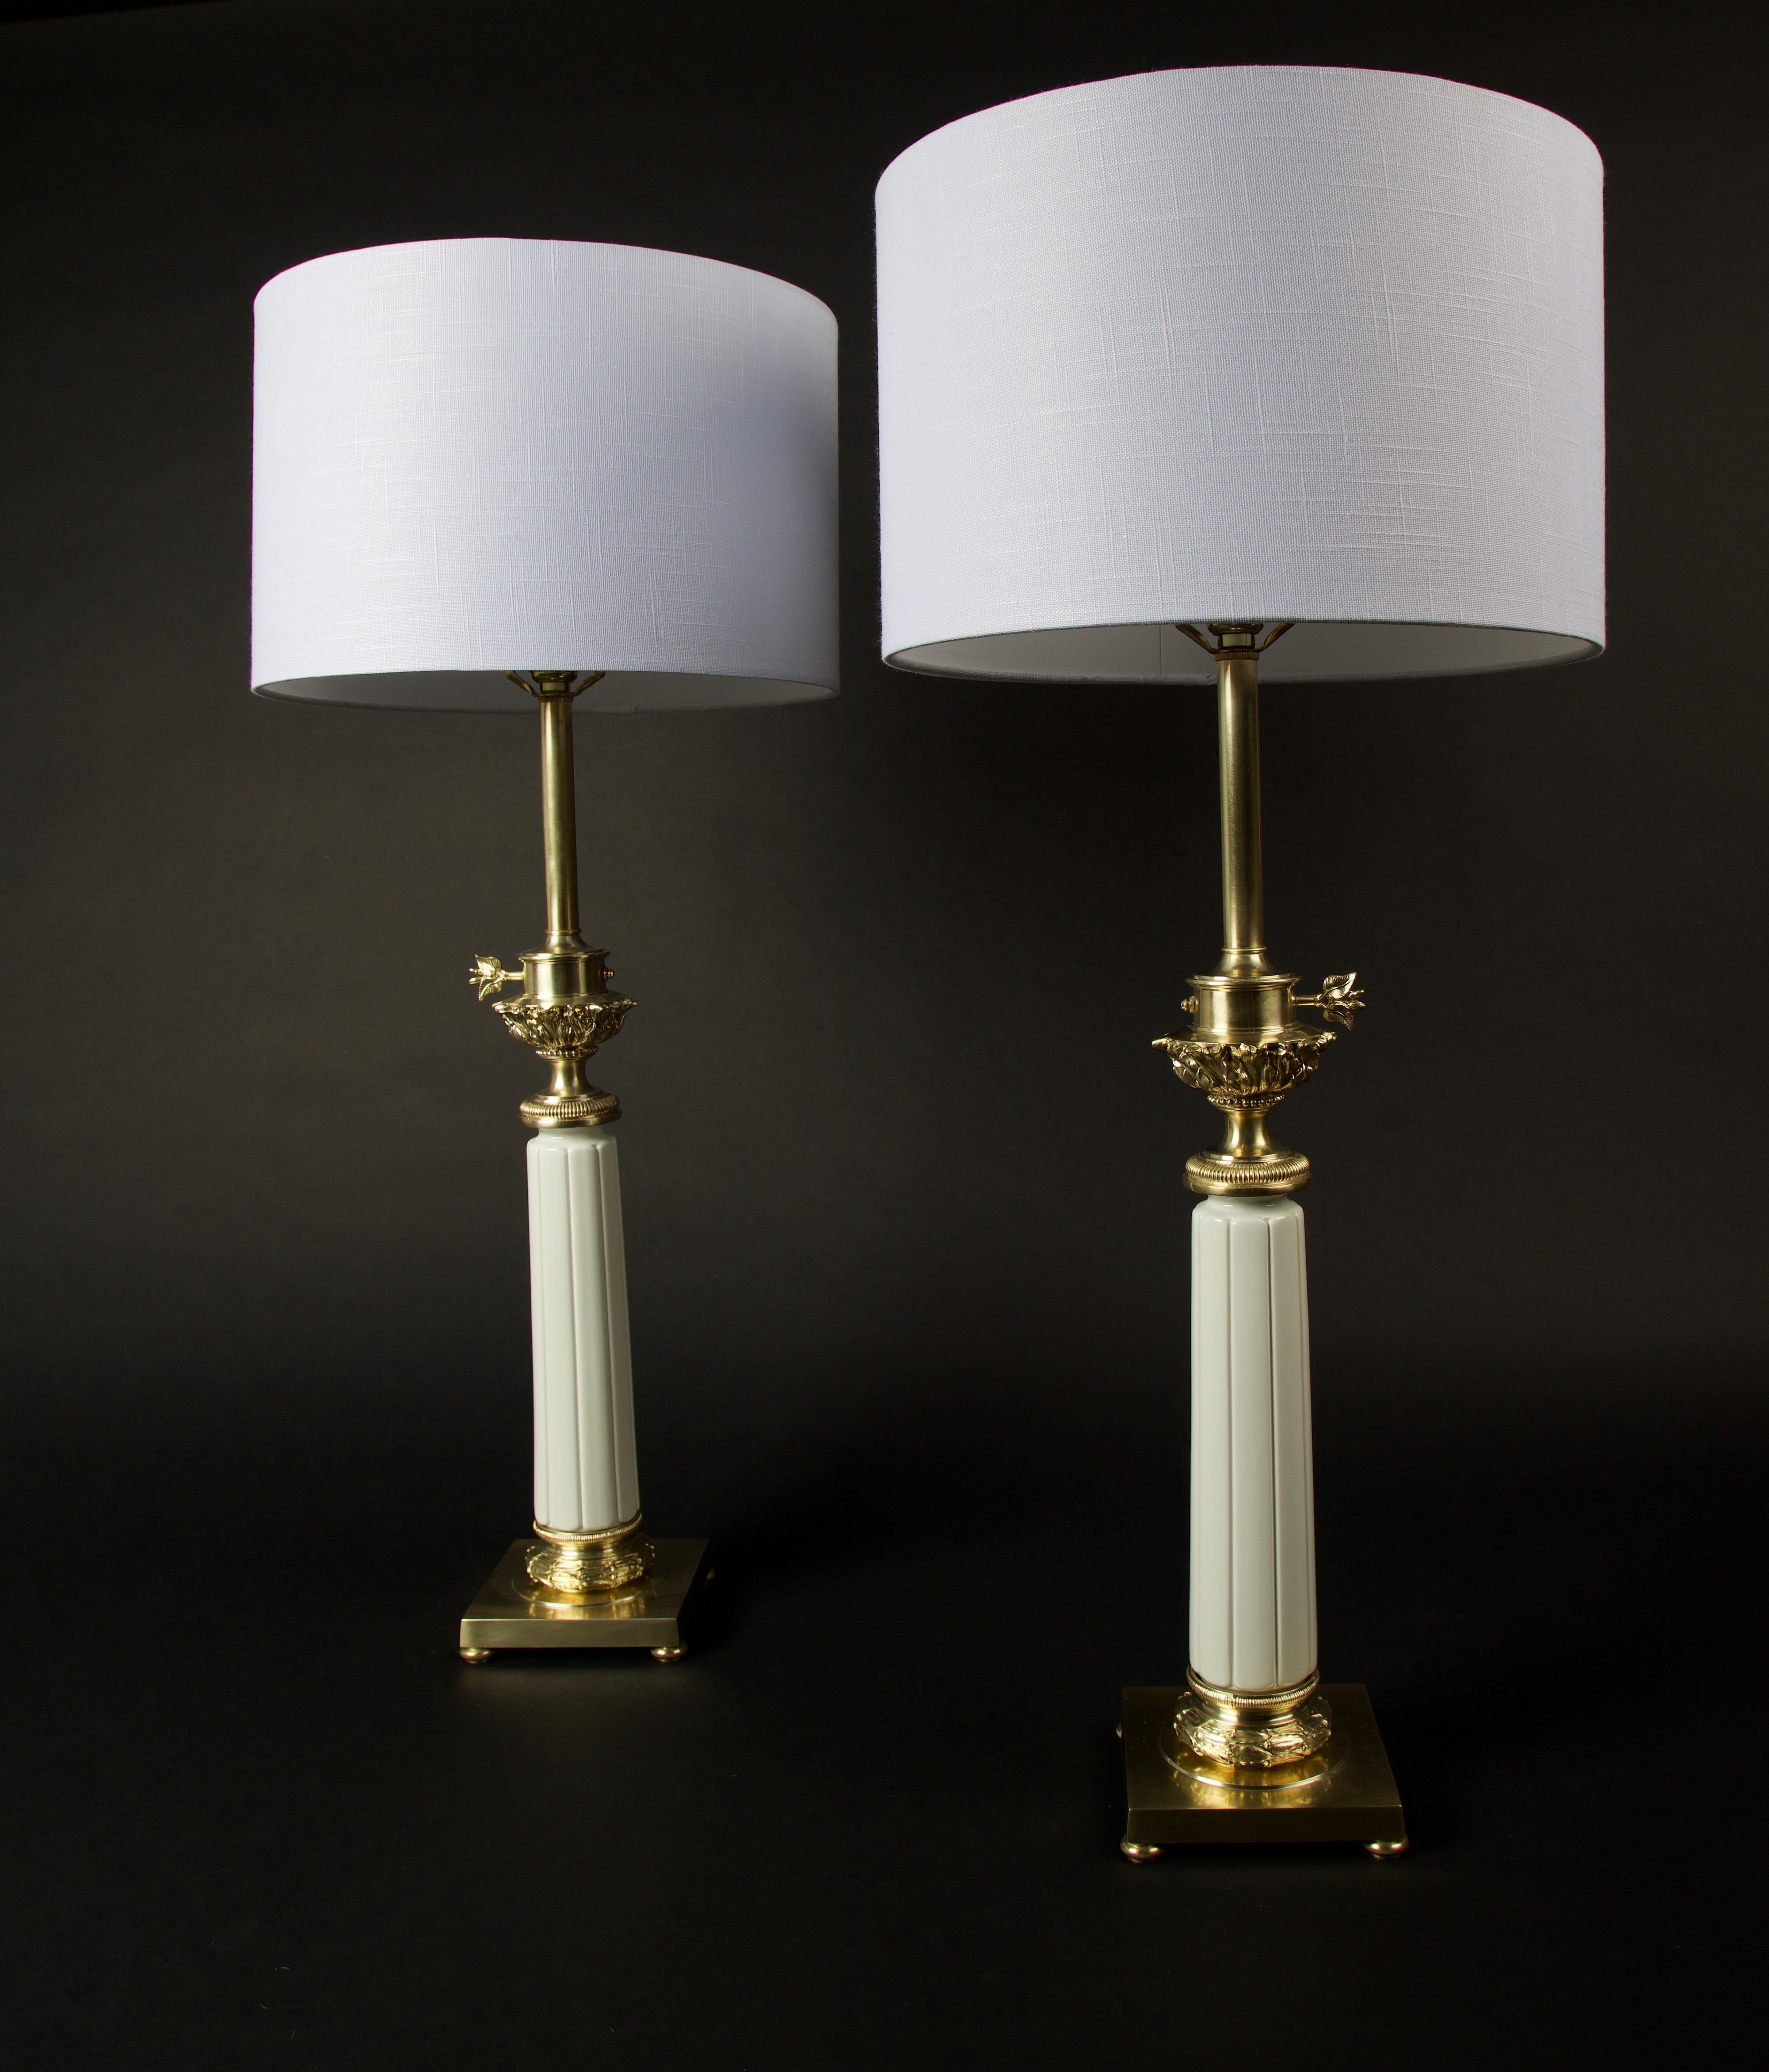 Pair of Hollywood Regency brass and ceramic Stiffel table lamps
Recently professional refinished.
Can go with a in a modern or traditional decor.
Neoclassic in style with a heavy weight solid brass cast and a white ceramic fluted cylinder. Shade